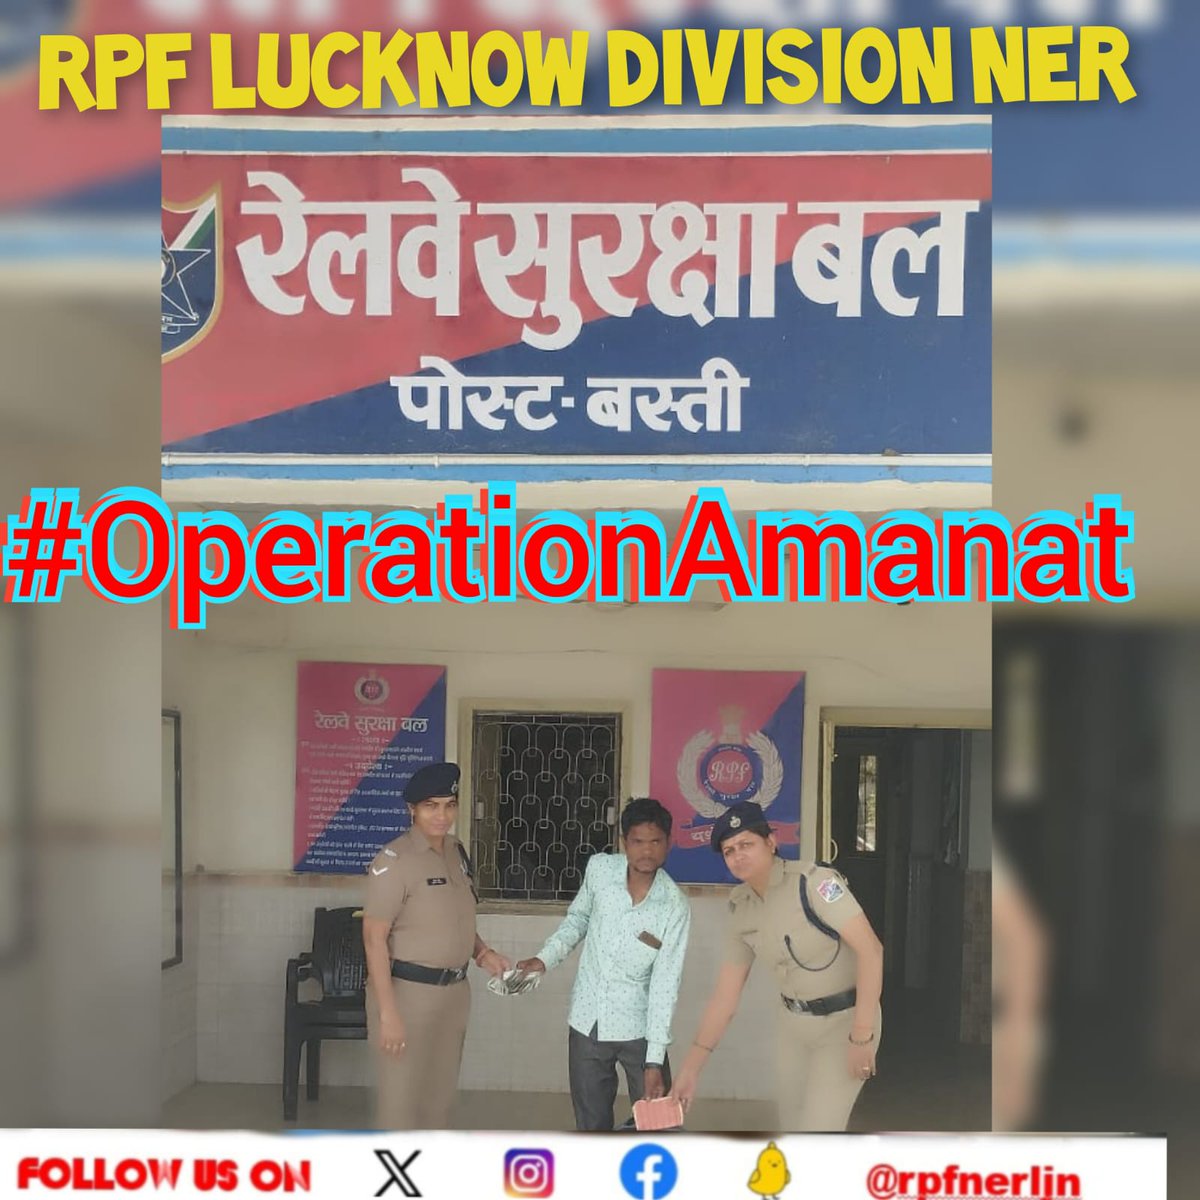 #OperationAmanat*
'Passenger's Happiness gives us Satisfaction.' 
#RPF Basti, Recovered left behind Passenger's Belonging 🛍️ From Train No015006  & later handed it over to its owner on 12.03.24. 
@DRM/LJN
@RPF_INDIA
@rpfner
@RailMinIndia
@rpfpcbst